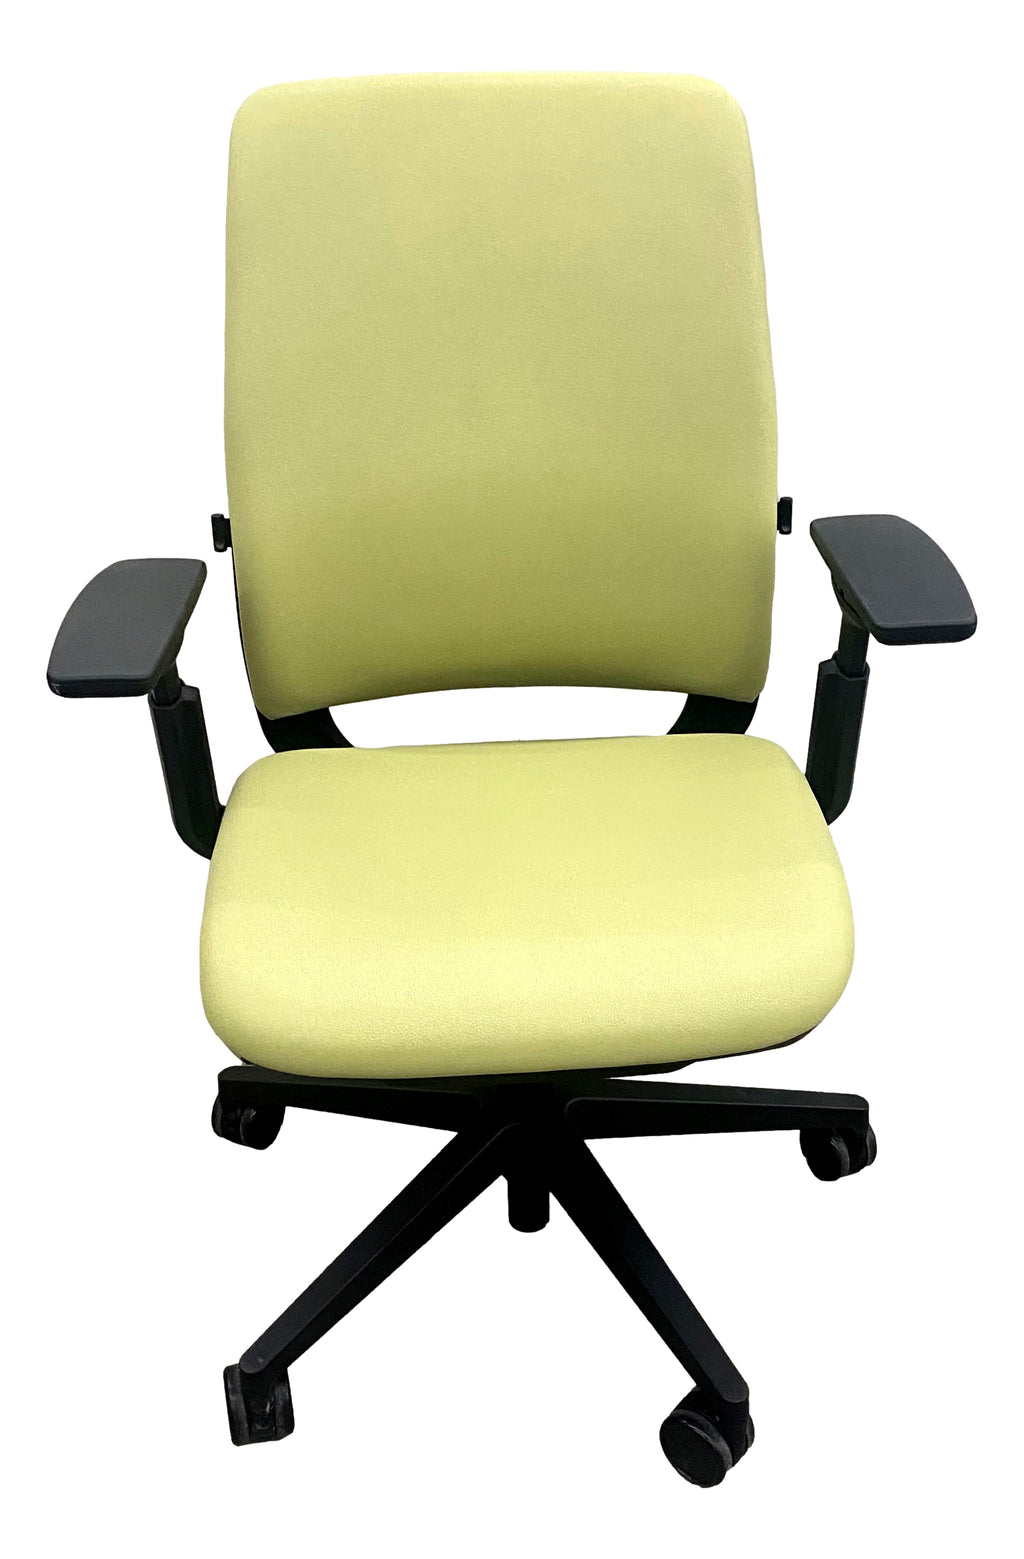 Steelcase Amia - Lime Green Leather (Pre-Owned)